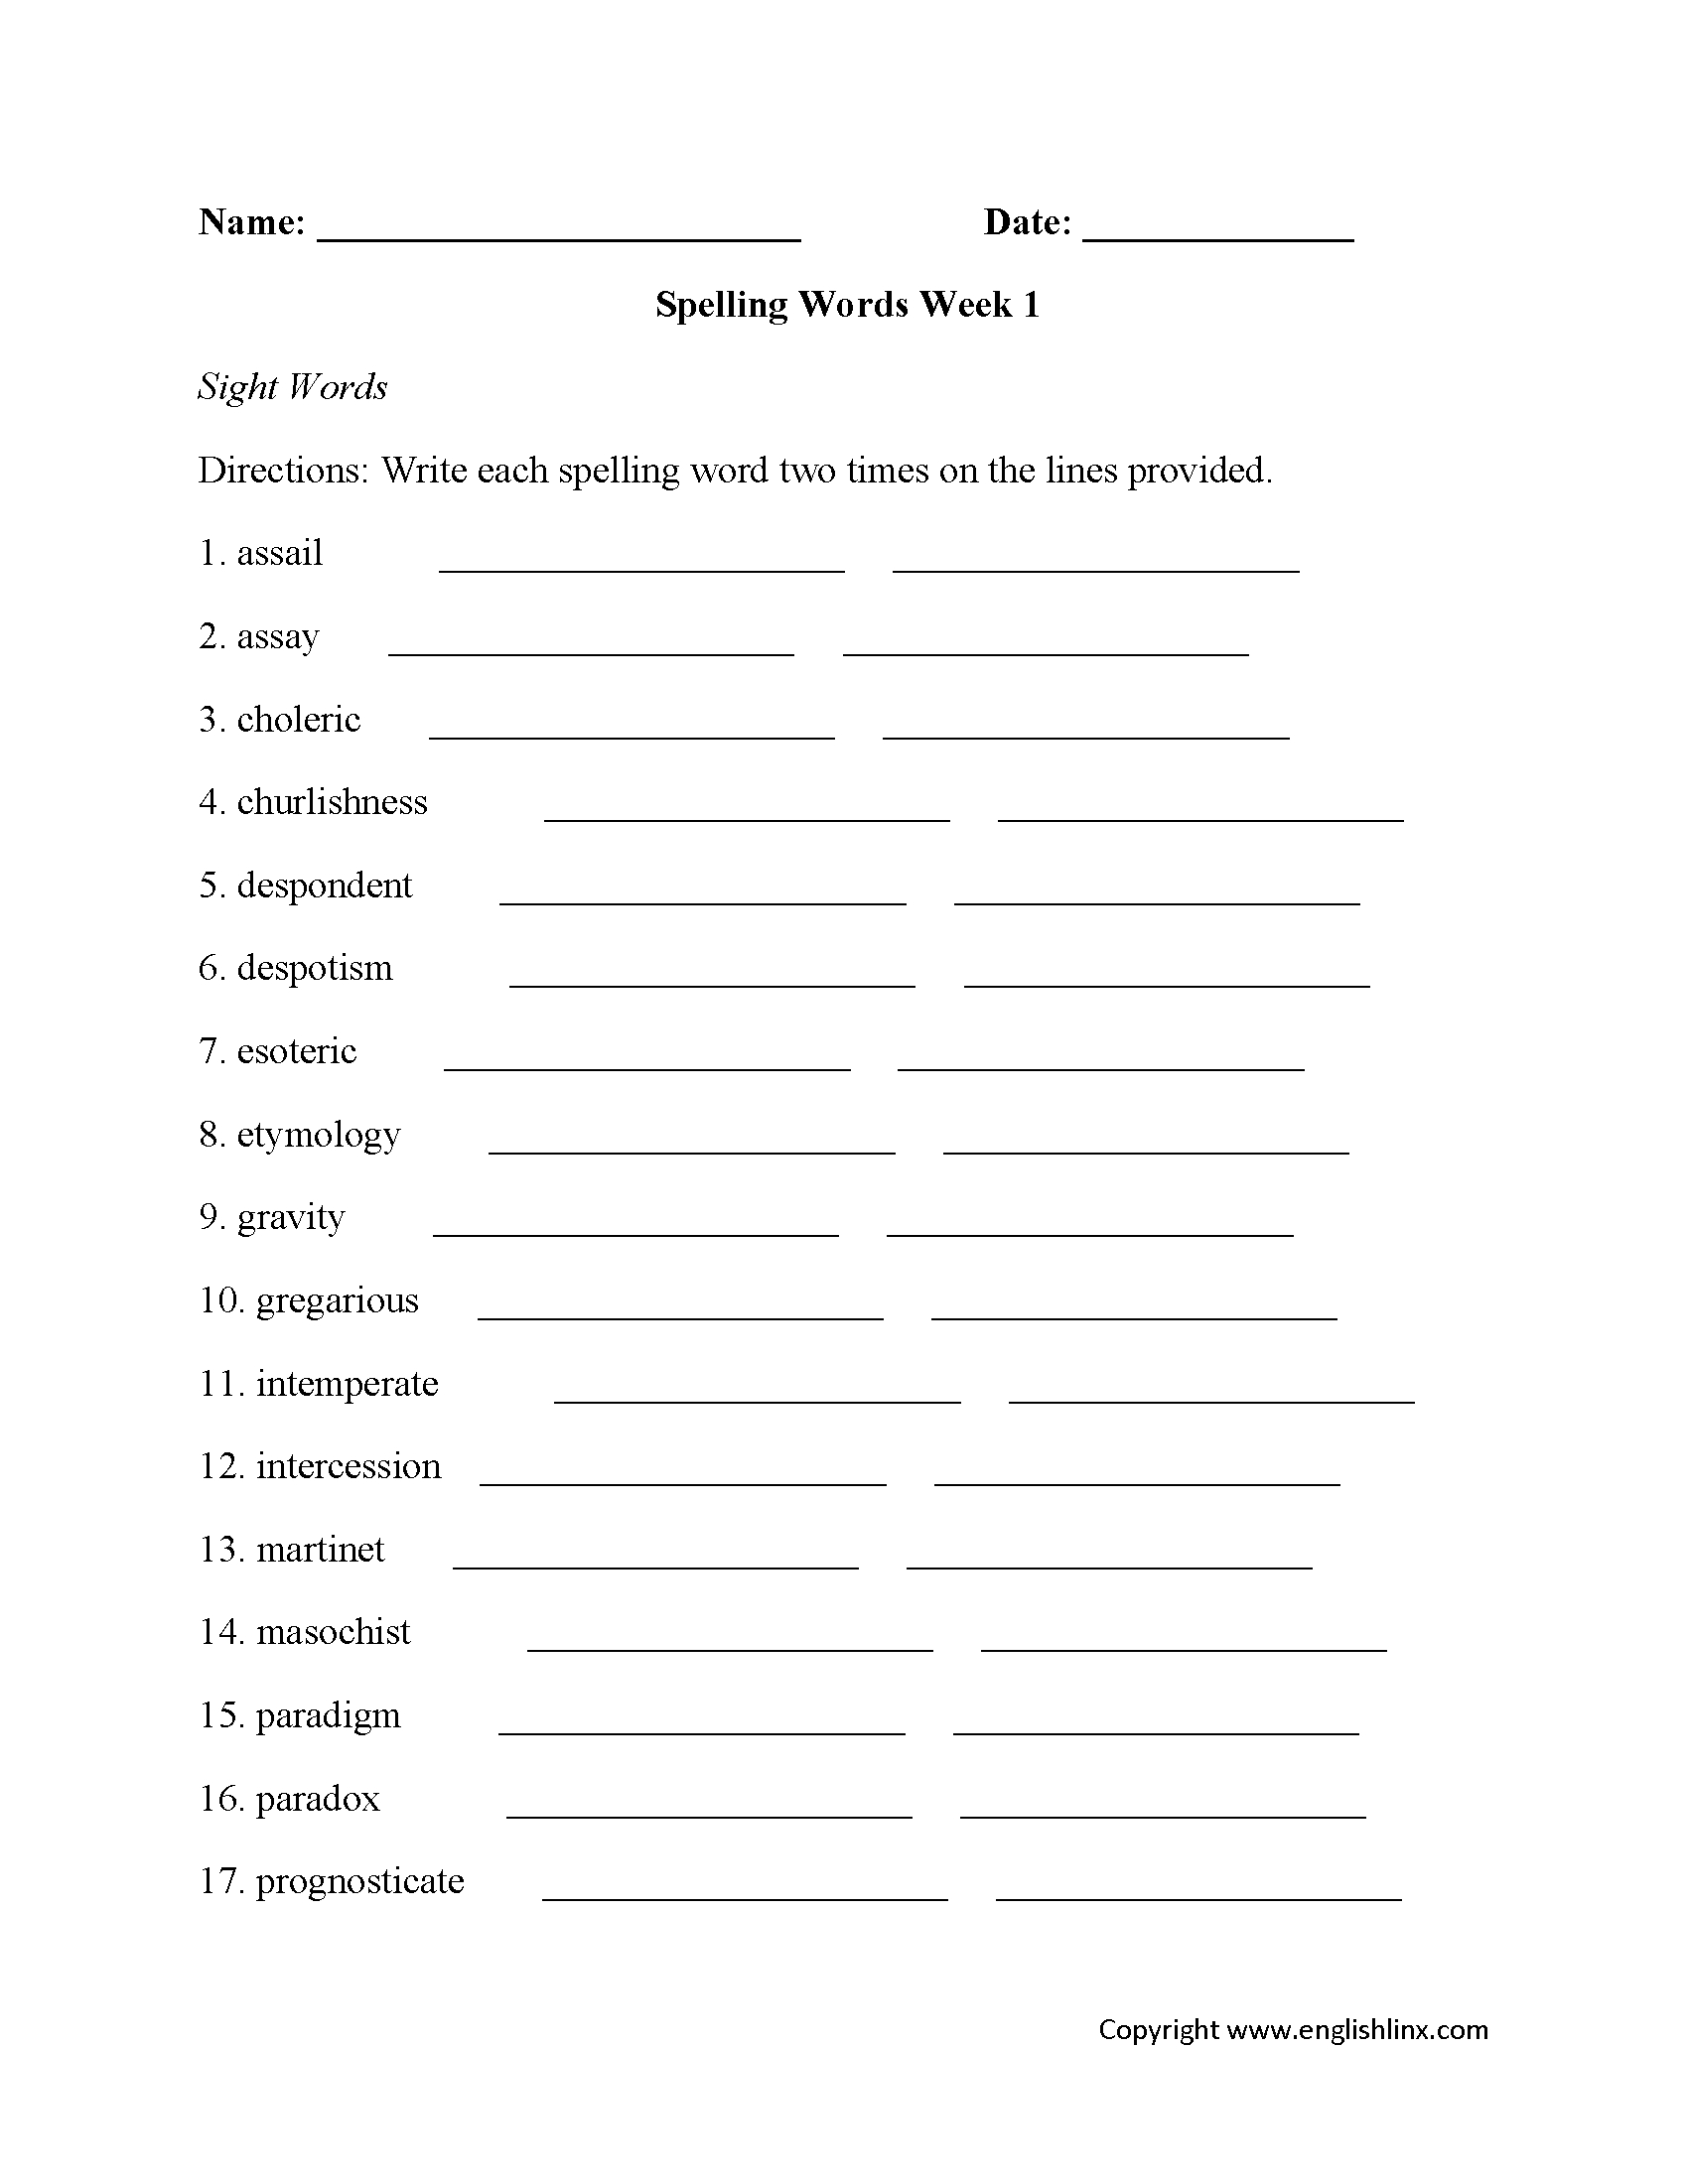 free-printable-spelling-worksheets-for-adults-free-printable